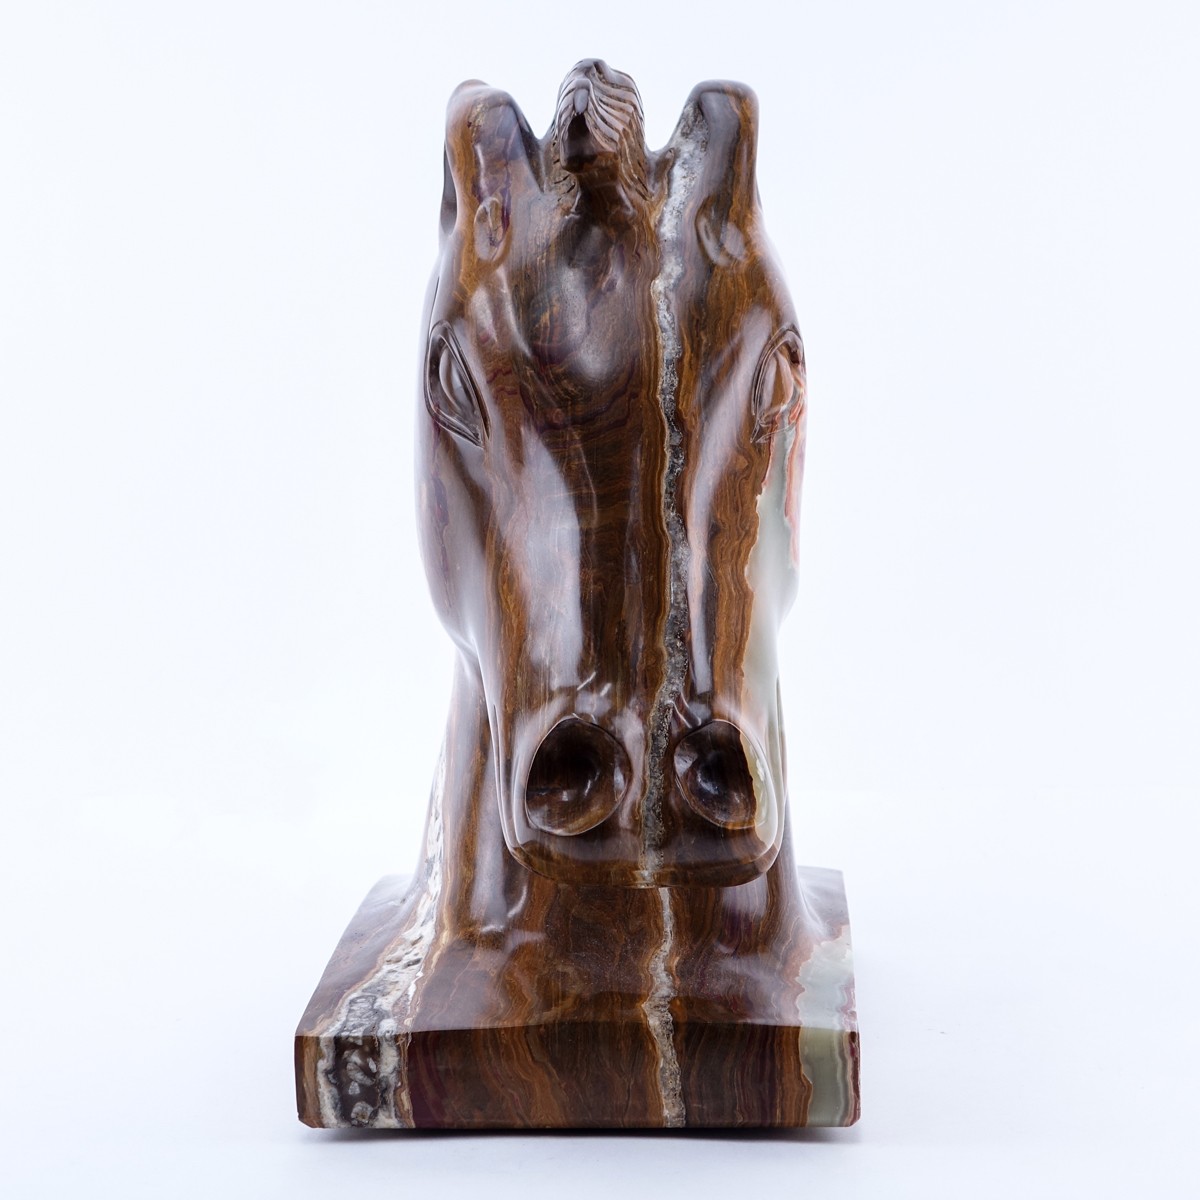 Large Carved Onyx Horse Head Sculpture Signed Bernie M. Rotating platform attached to base.